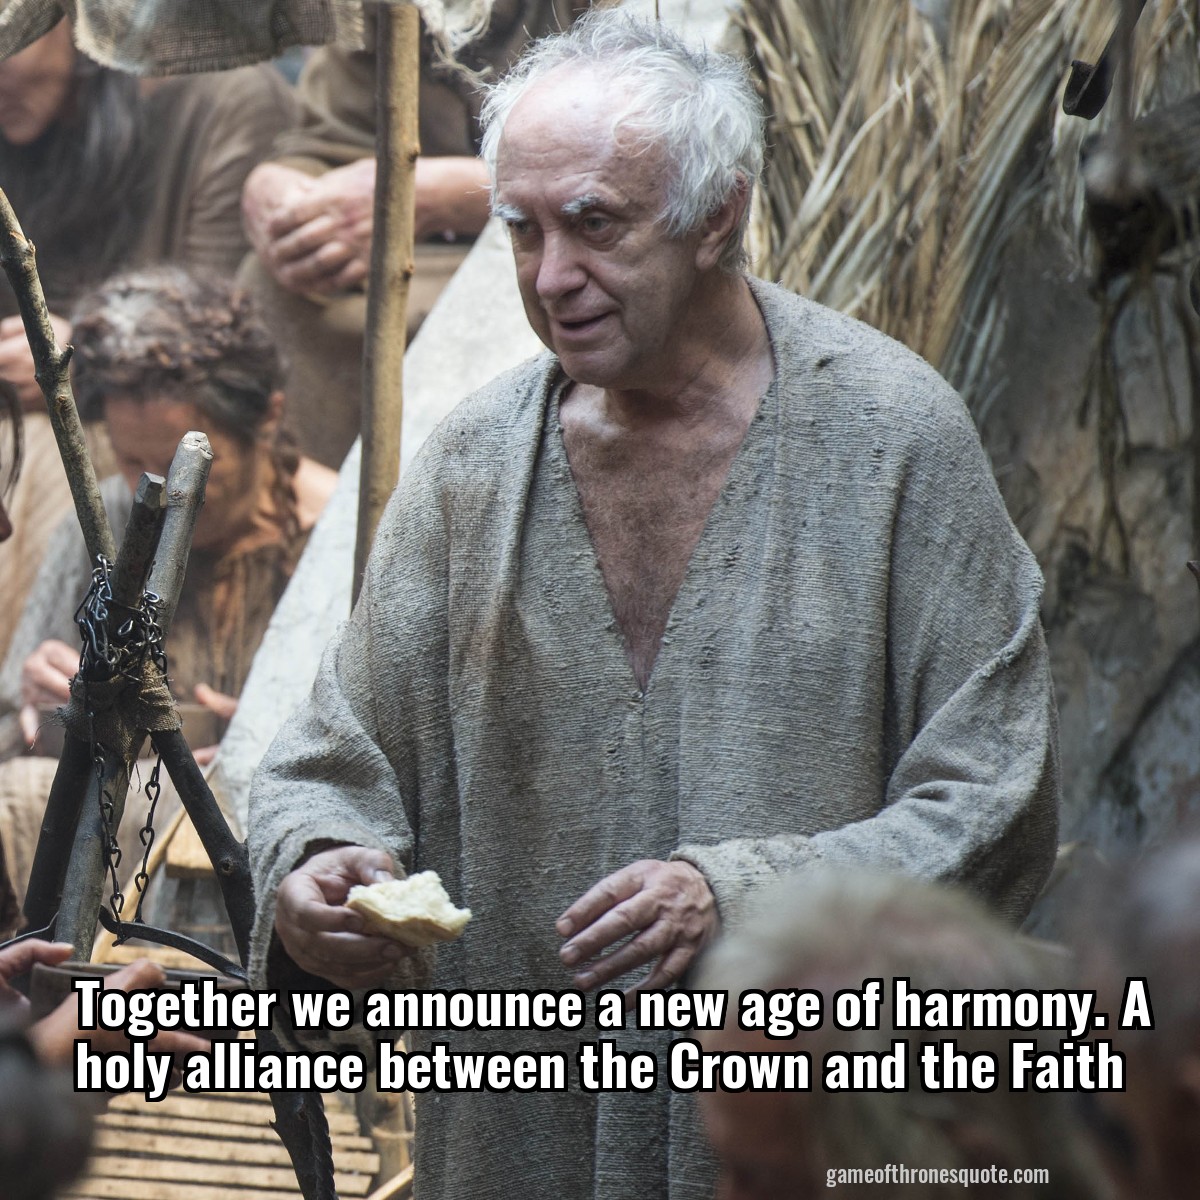 Together we announce a new age of harmony. A holy alliance between the Crown and the Faith